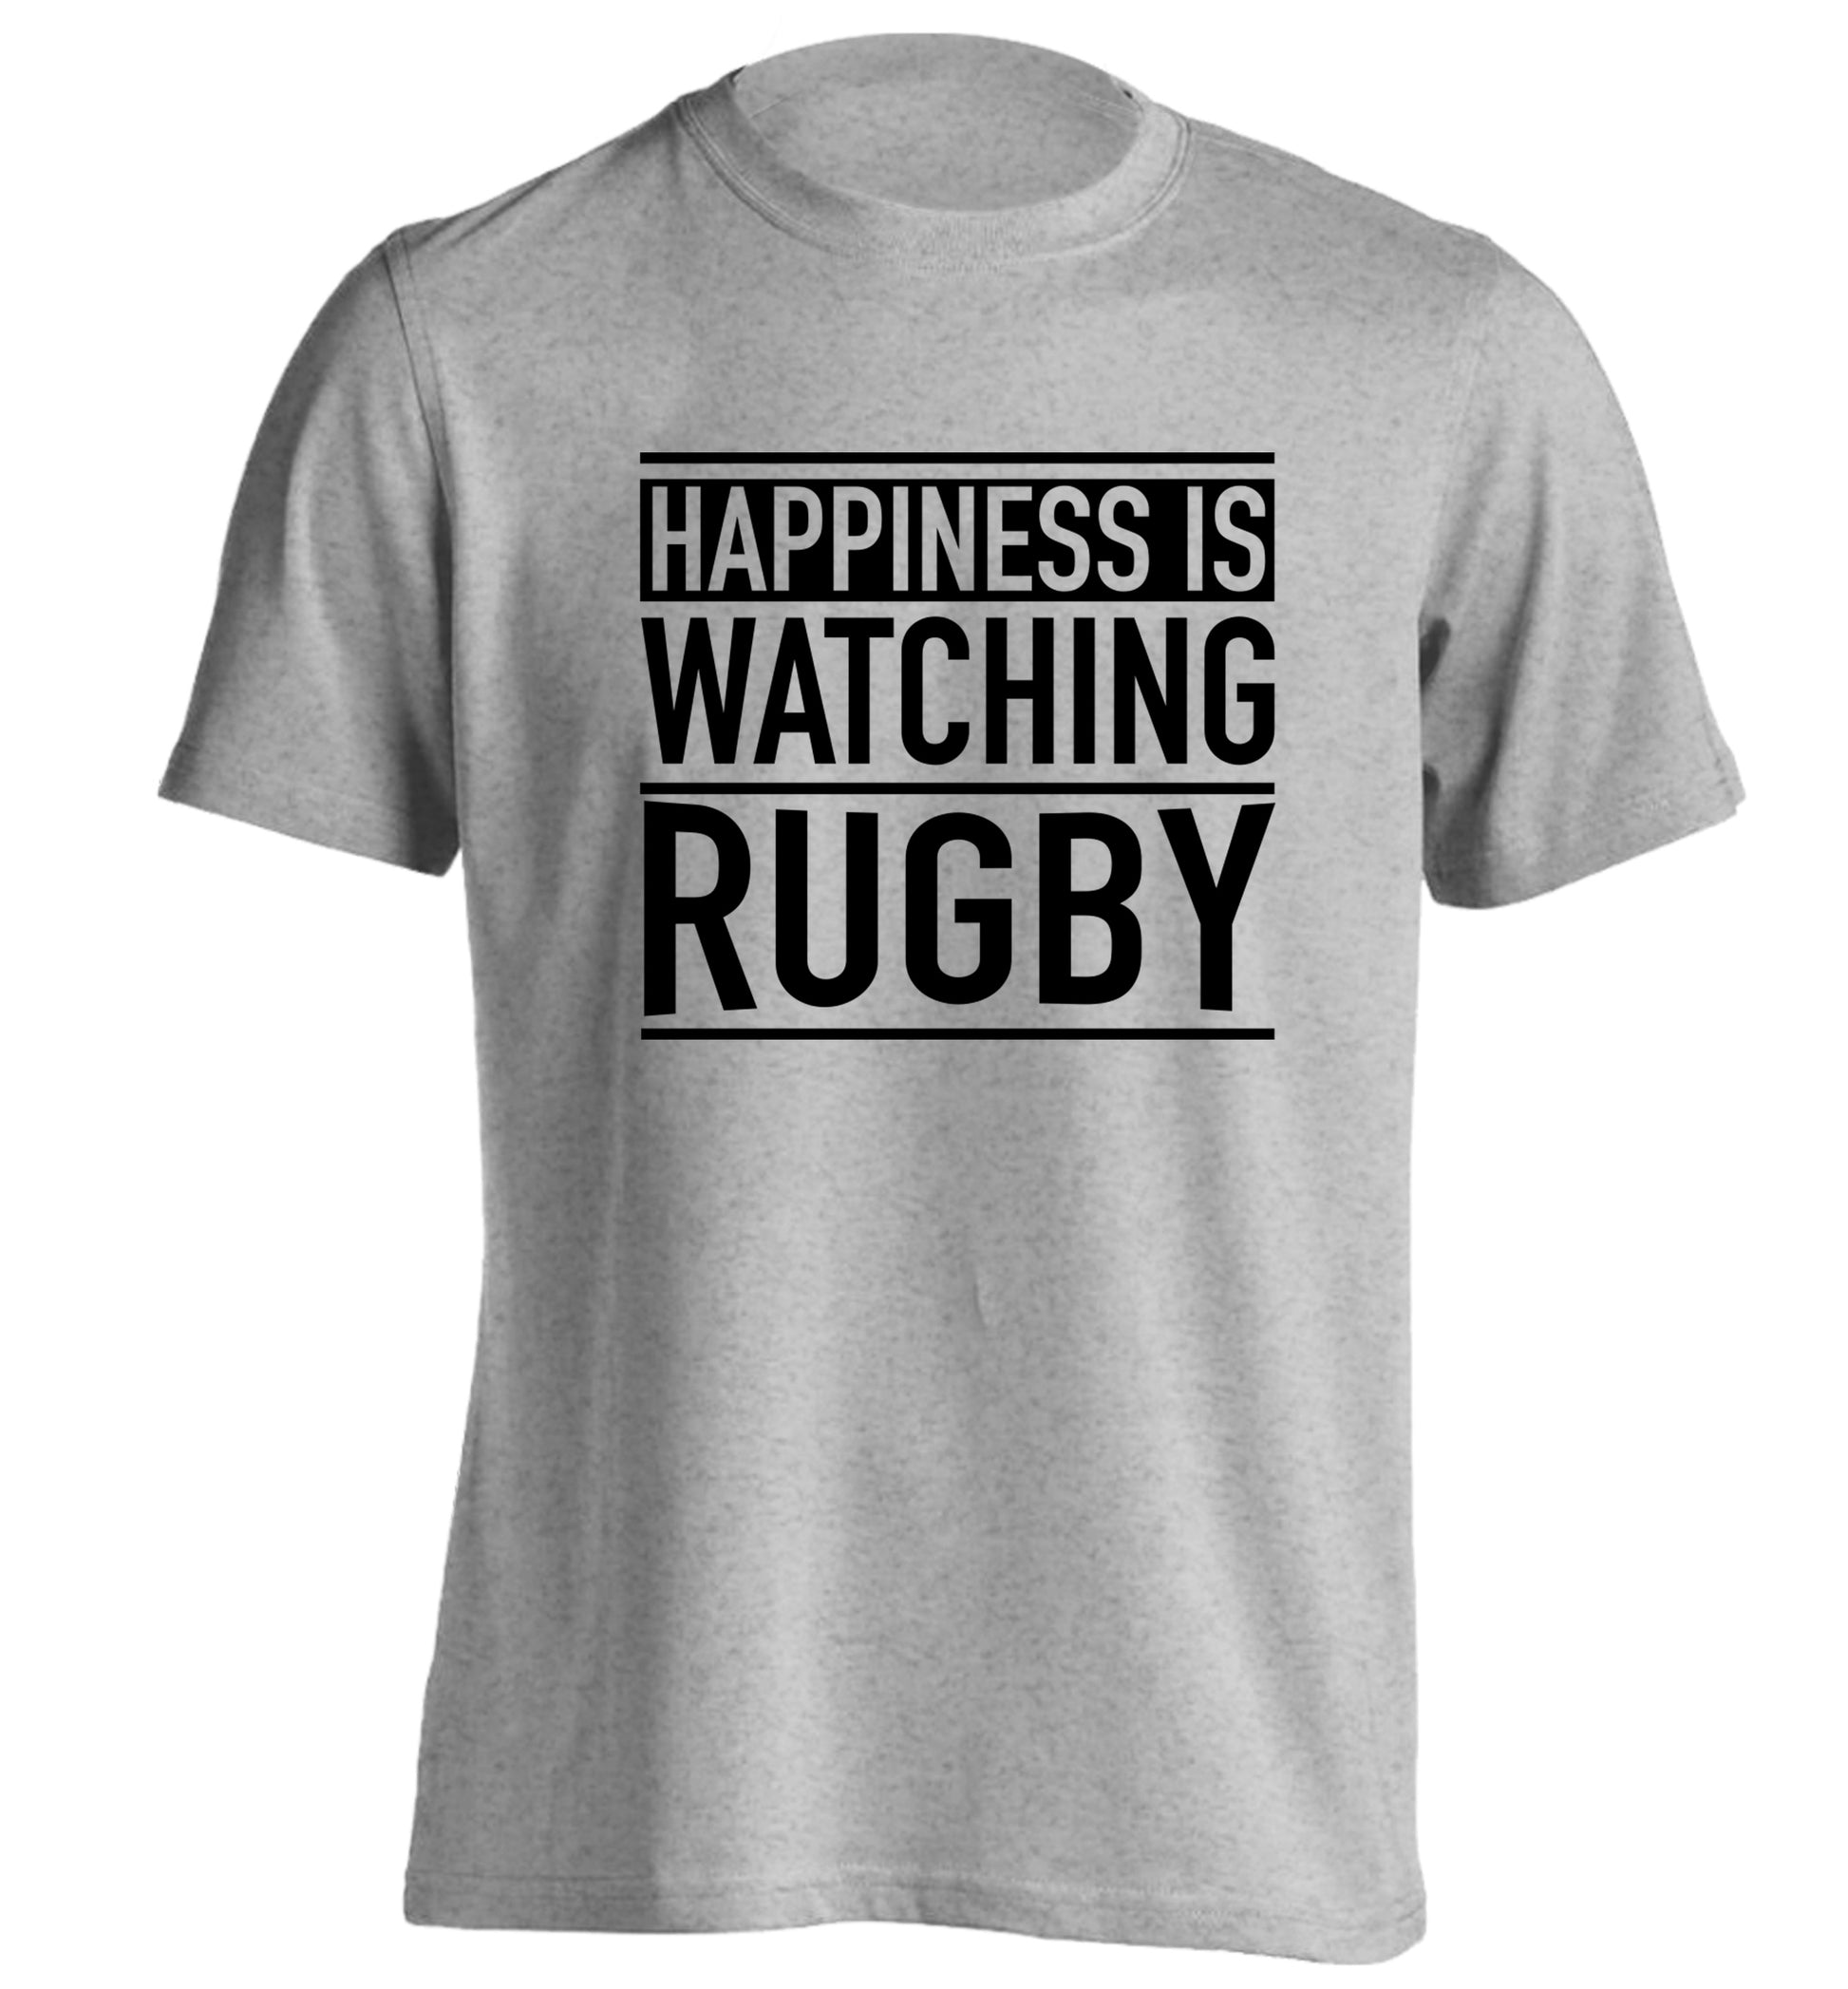 Happiness is watching rugby adults unisex grey Tshirt 2XL